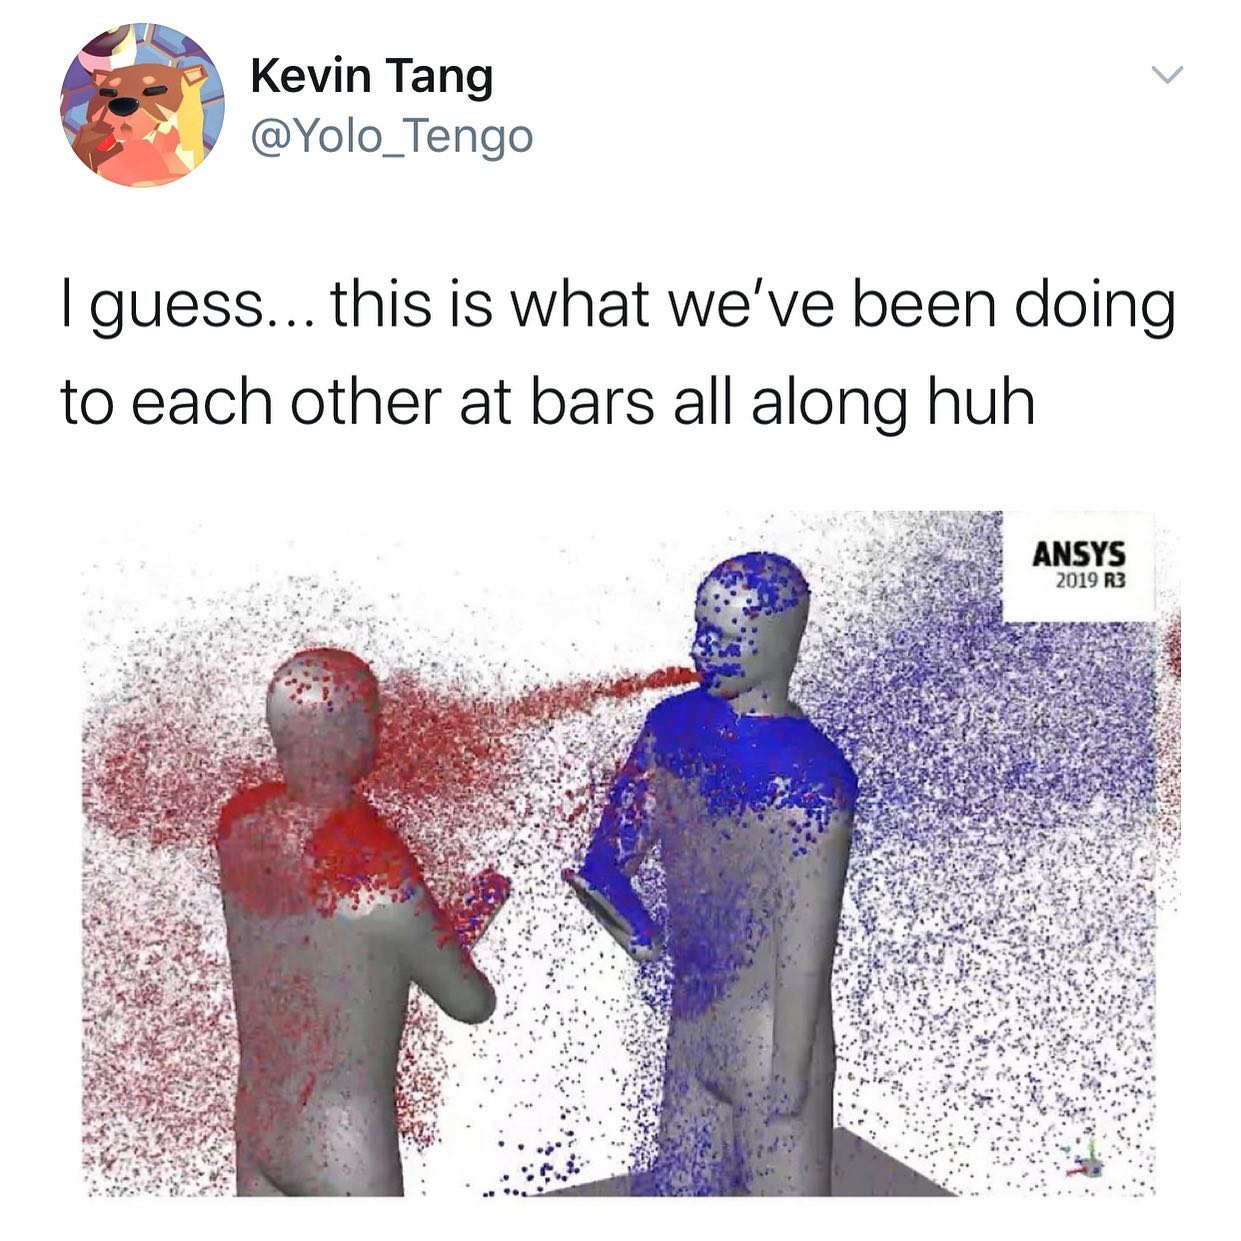 dank memes - twitter - me and the boys absolutely blasting each other with particles - Kevin Tang I guess... this is what we've been doing to each other at bars all along huh Ansys 2019 R3